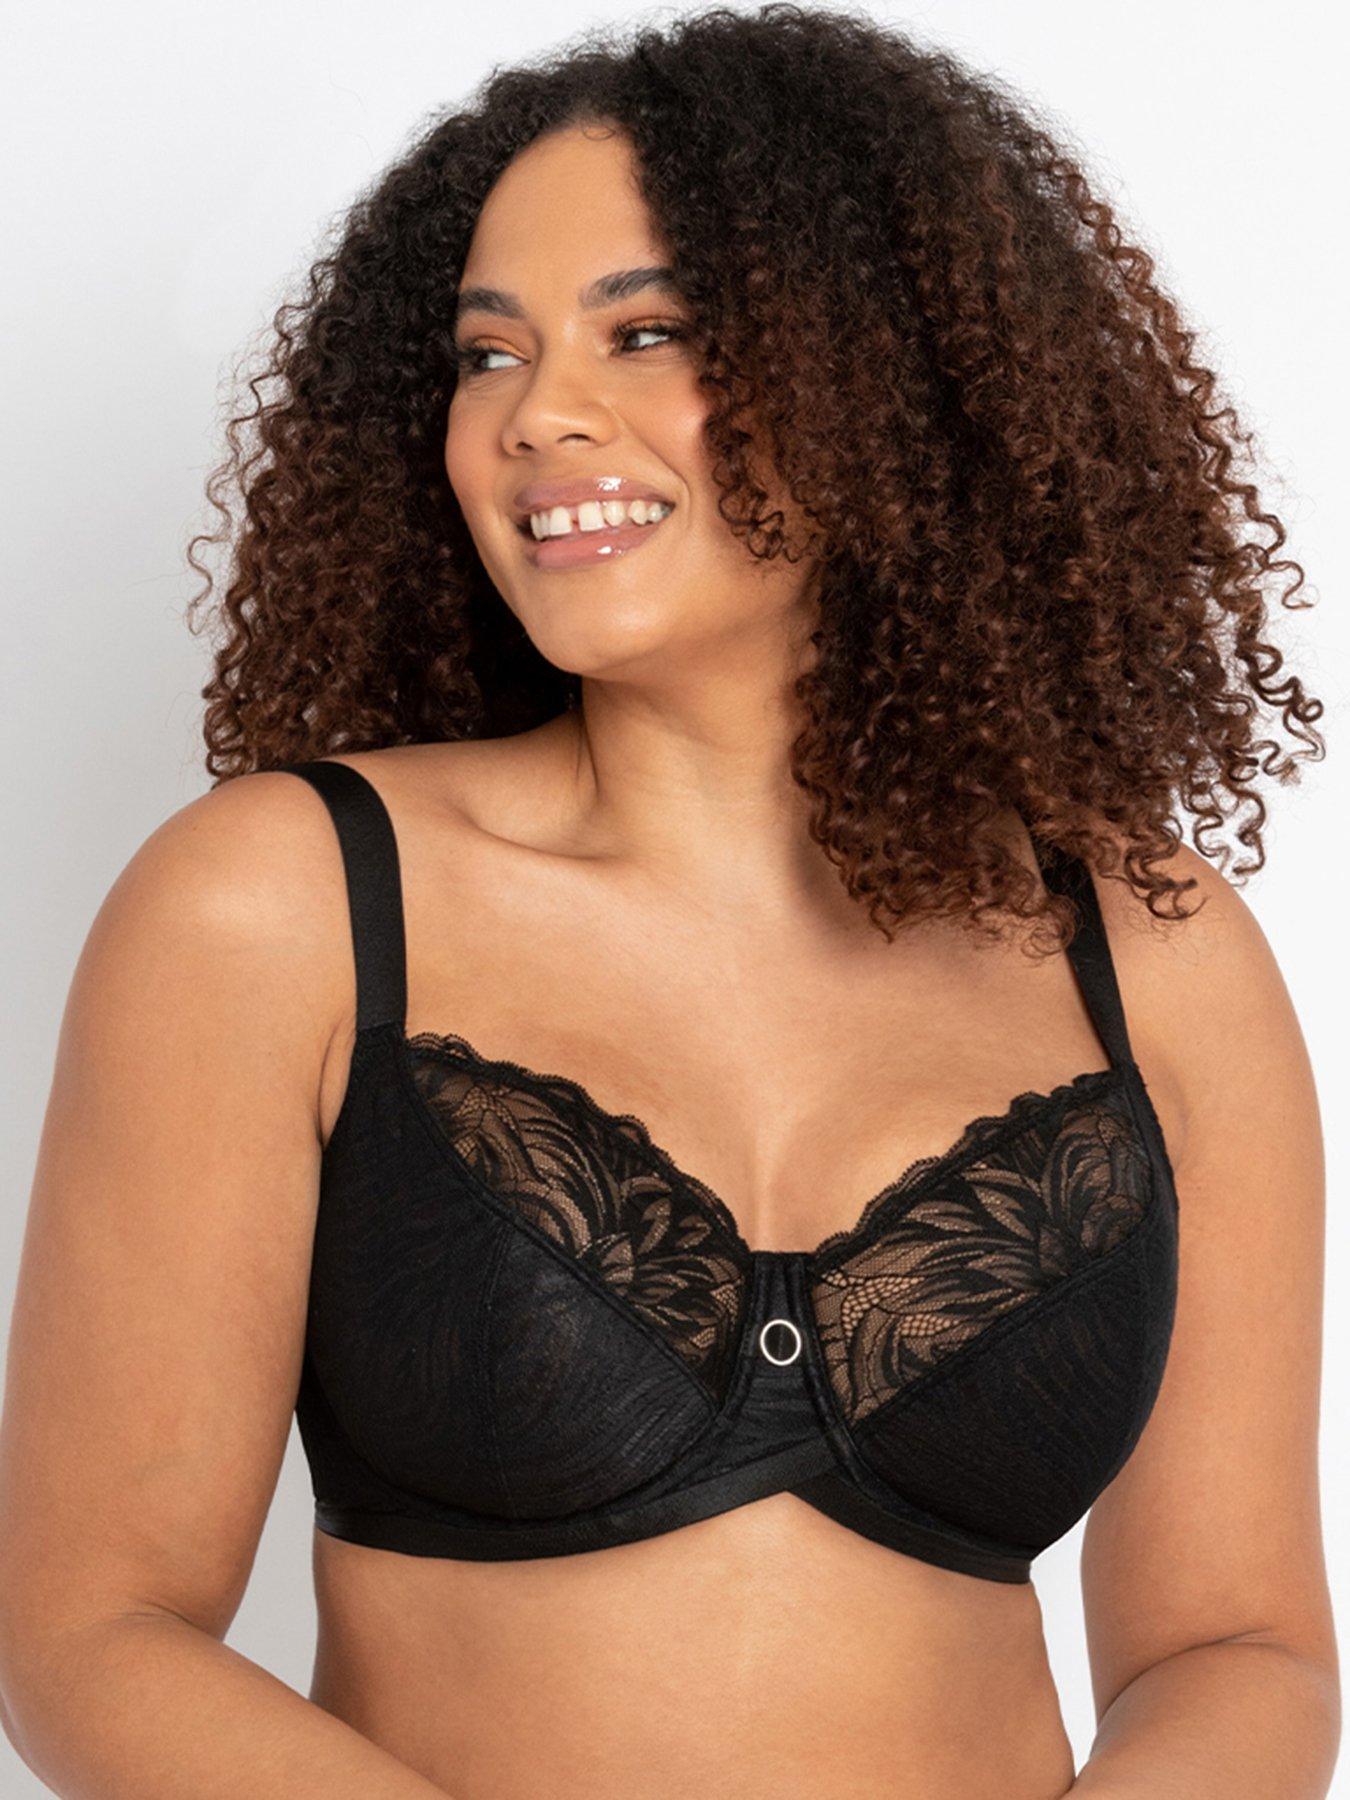 44F Bra Size in H Cup Sizes Black Balcony and Lace Cup